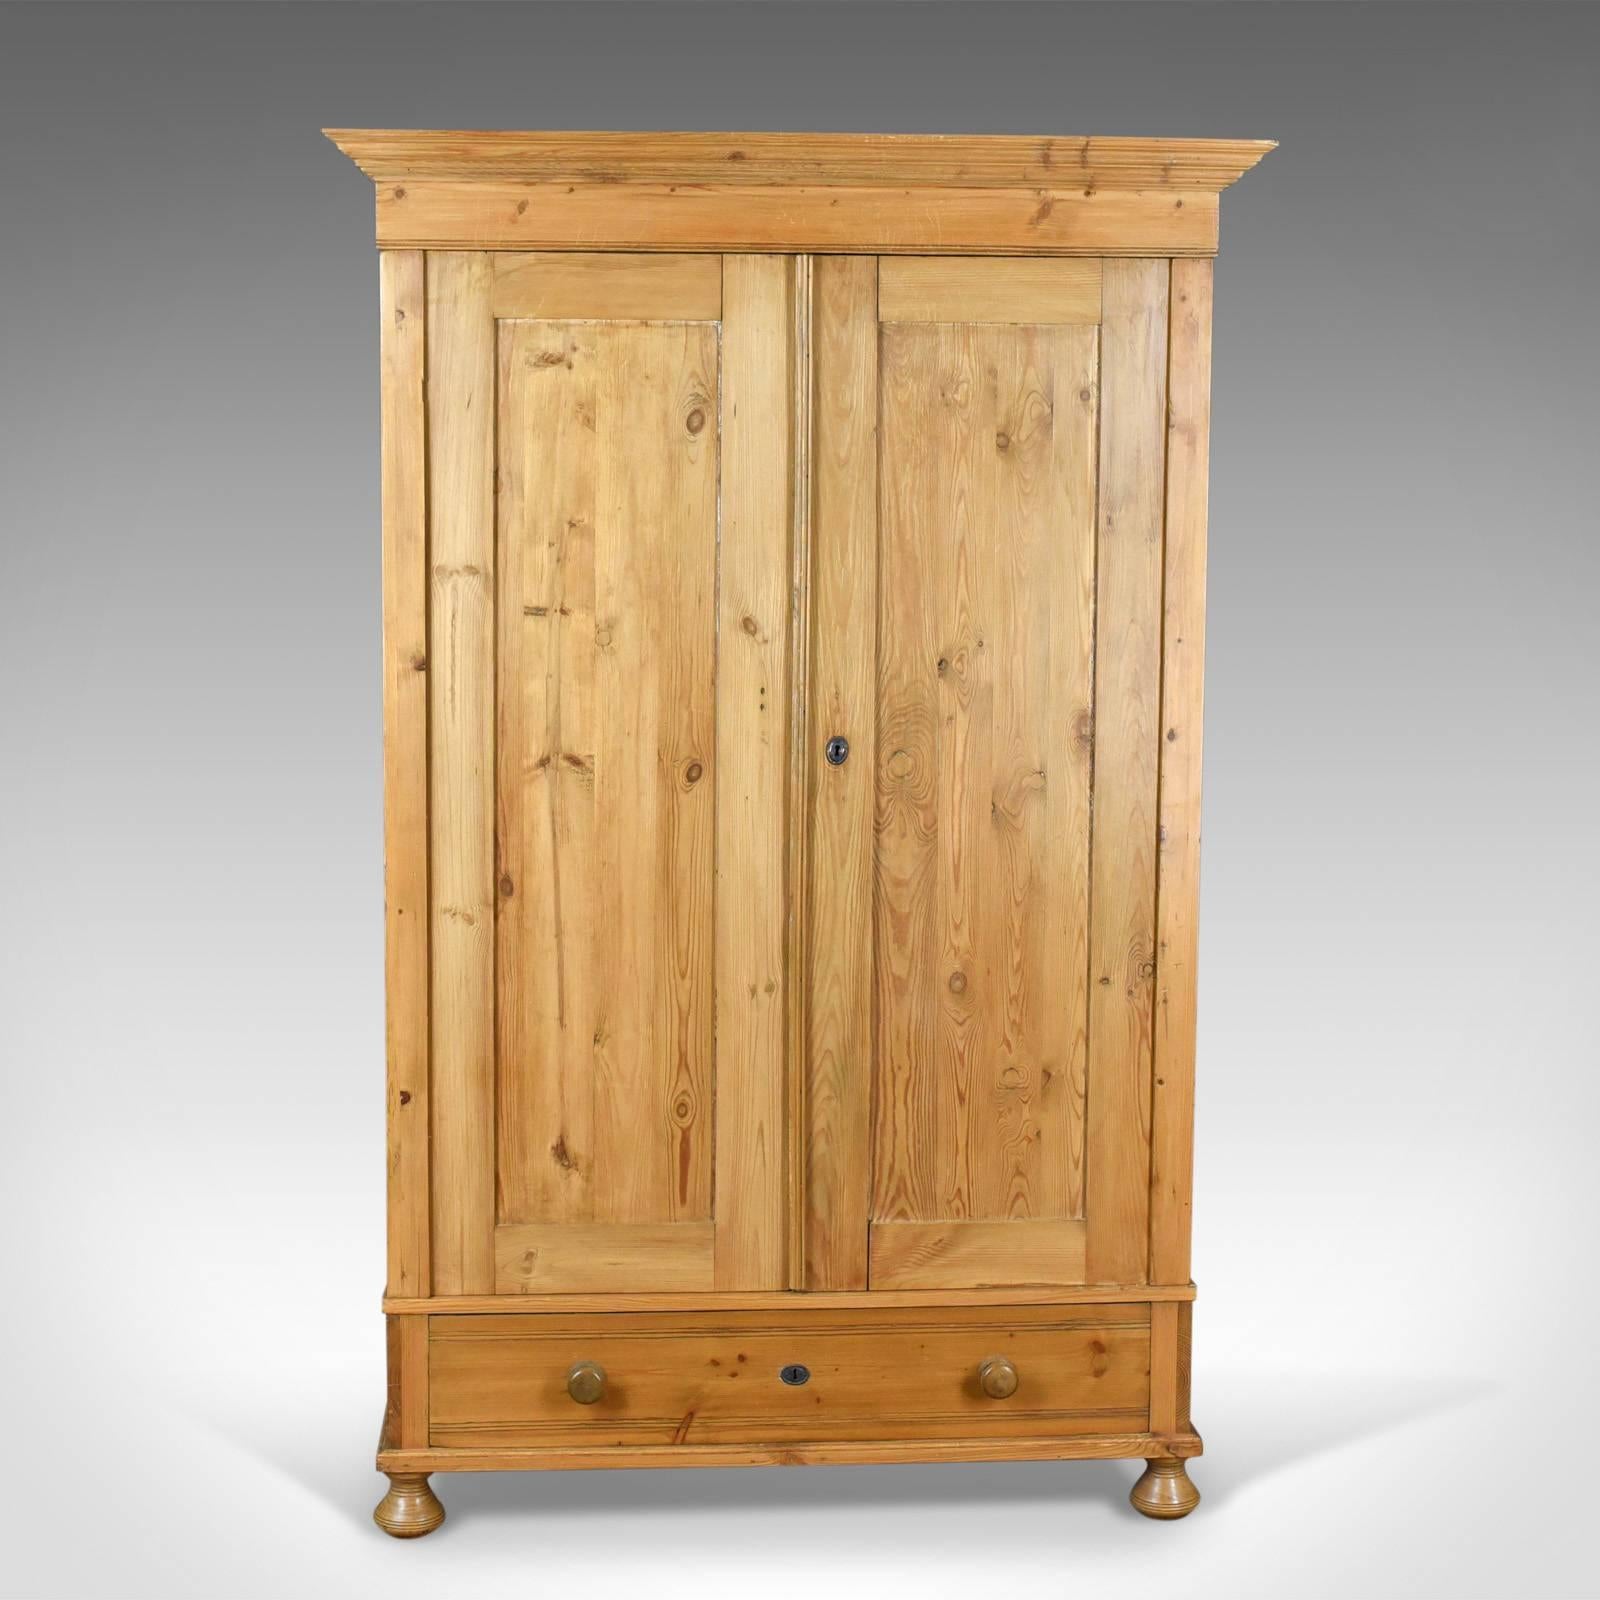 This is an antique wardrobe, a French provincial pine compactum cupboard dating to the early 20th century, circa 1900.

Attractive French provincial cabinet
Pine with grain interest in a wax polished finish
Arranged two doors over single full